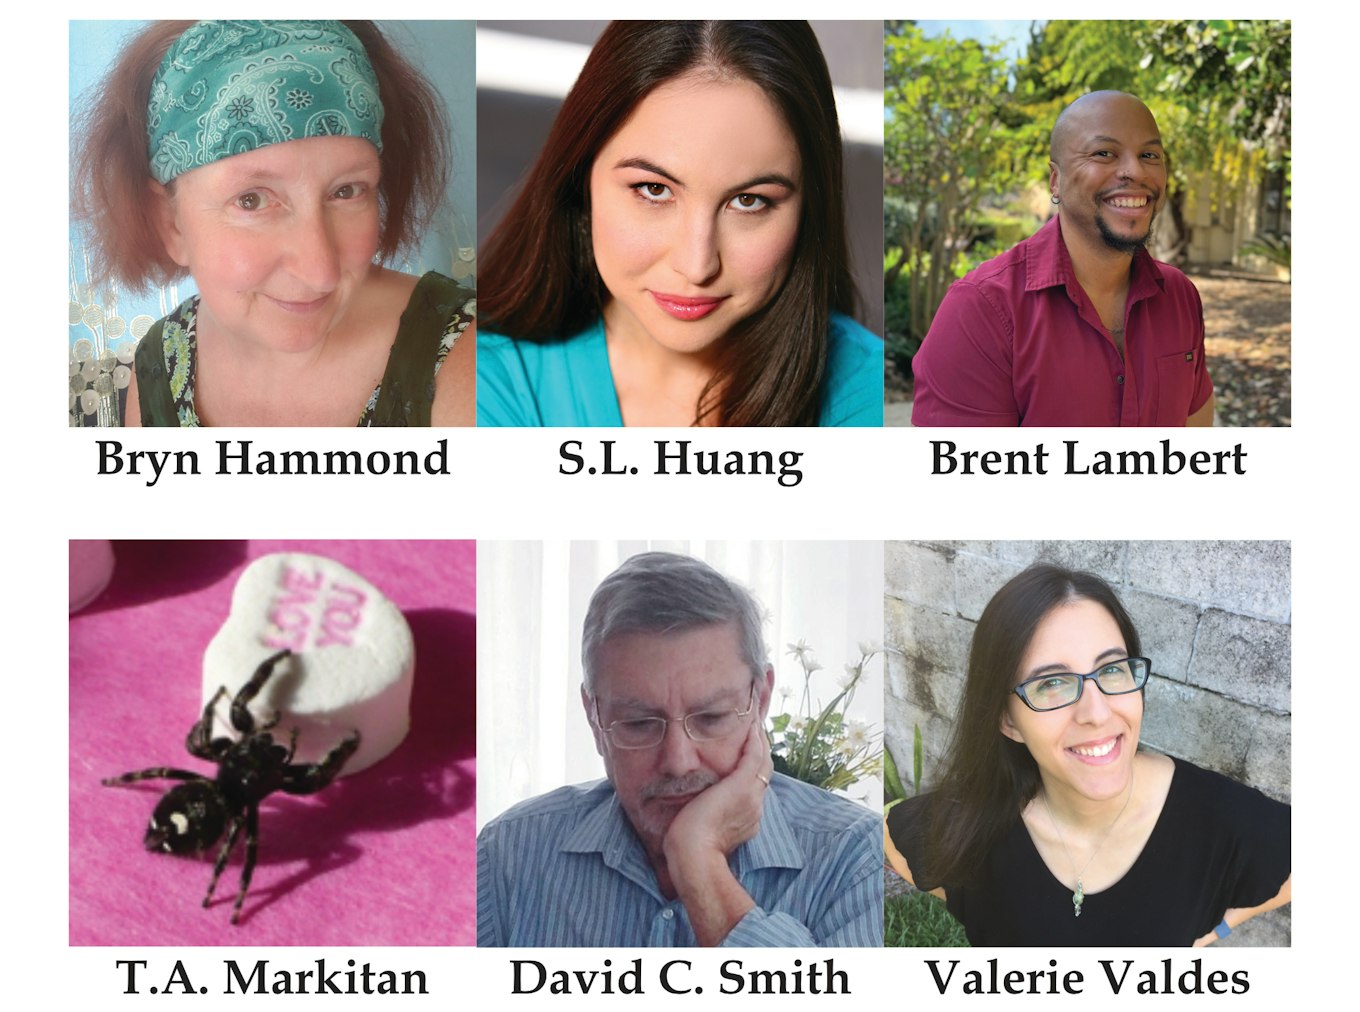  Author portraits of Bryn Hammond, S.L. Huang, Brent Lambert, T.A. Markitan, David C. Smith, and Valerie Valdes. 